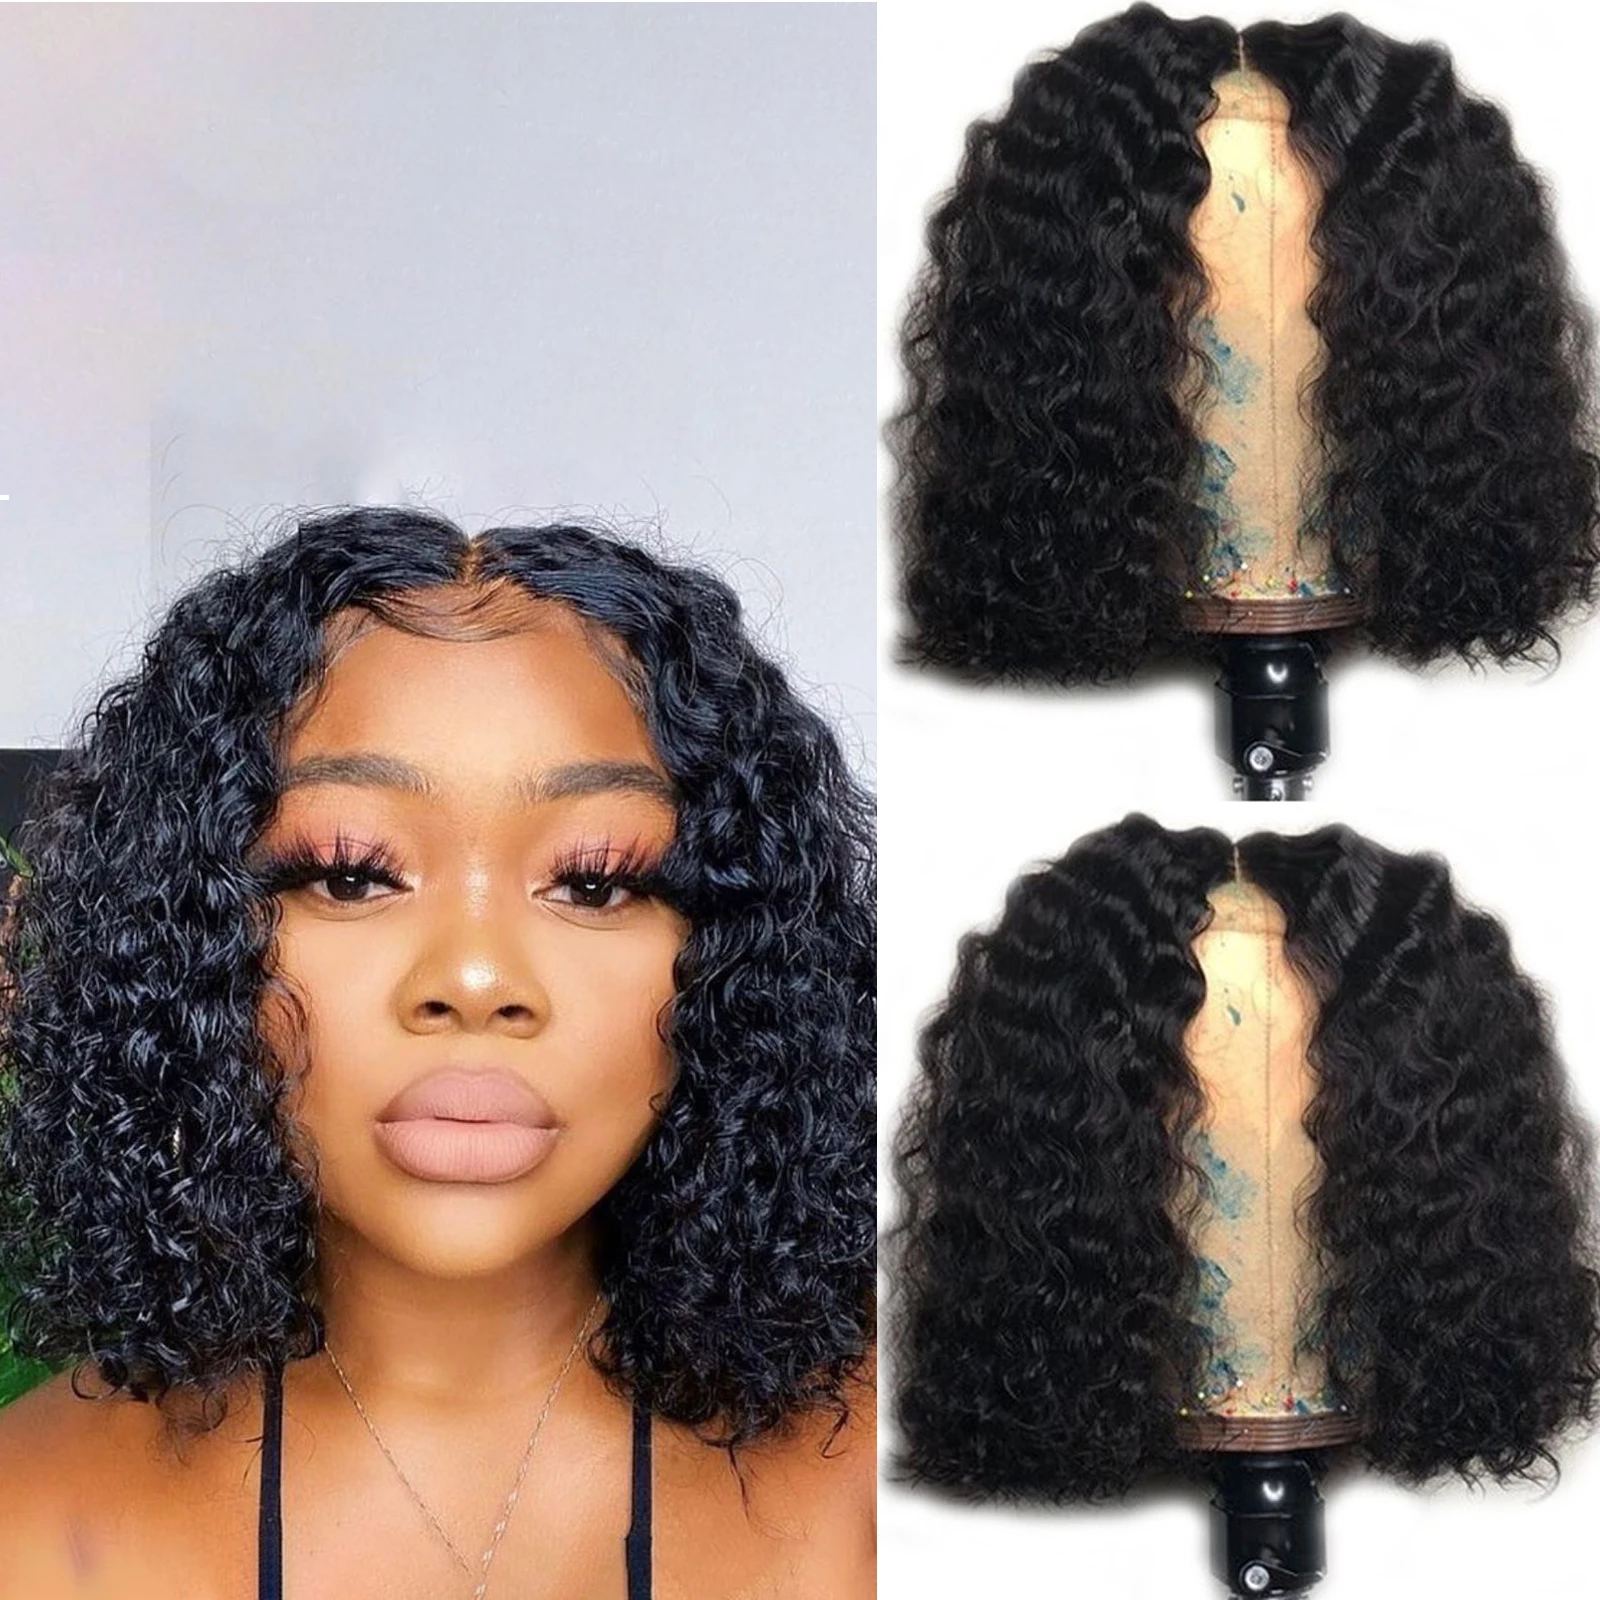 Sunnymay Short 4x4 Curly Human Hair Wigs Remy Brazilian Lace Front Wigs With Baby Hair Pre Plucked Lace Front Human Hair Wigs